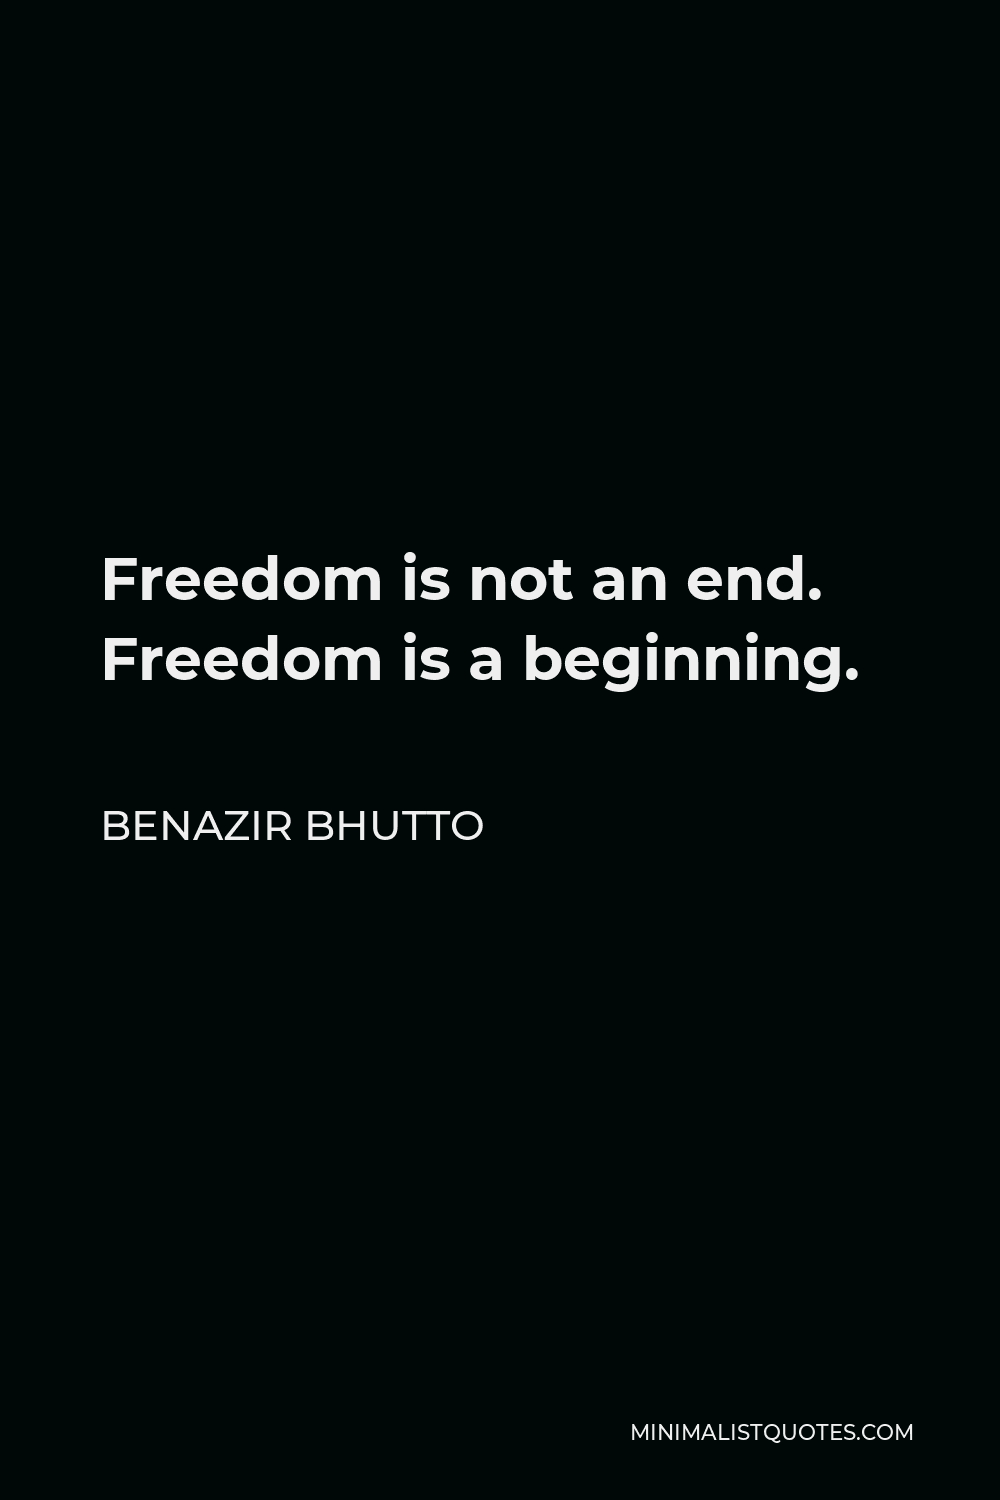 Benazir Bhutto Quote - Freedom is not an end. Freedom is a beginning.